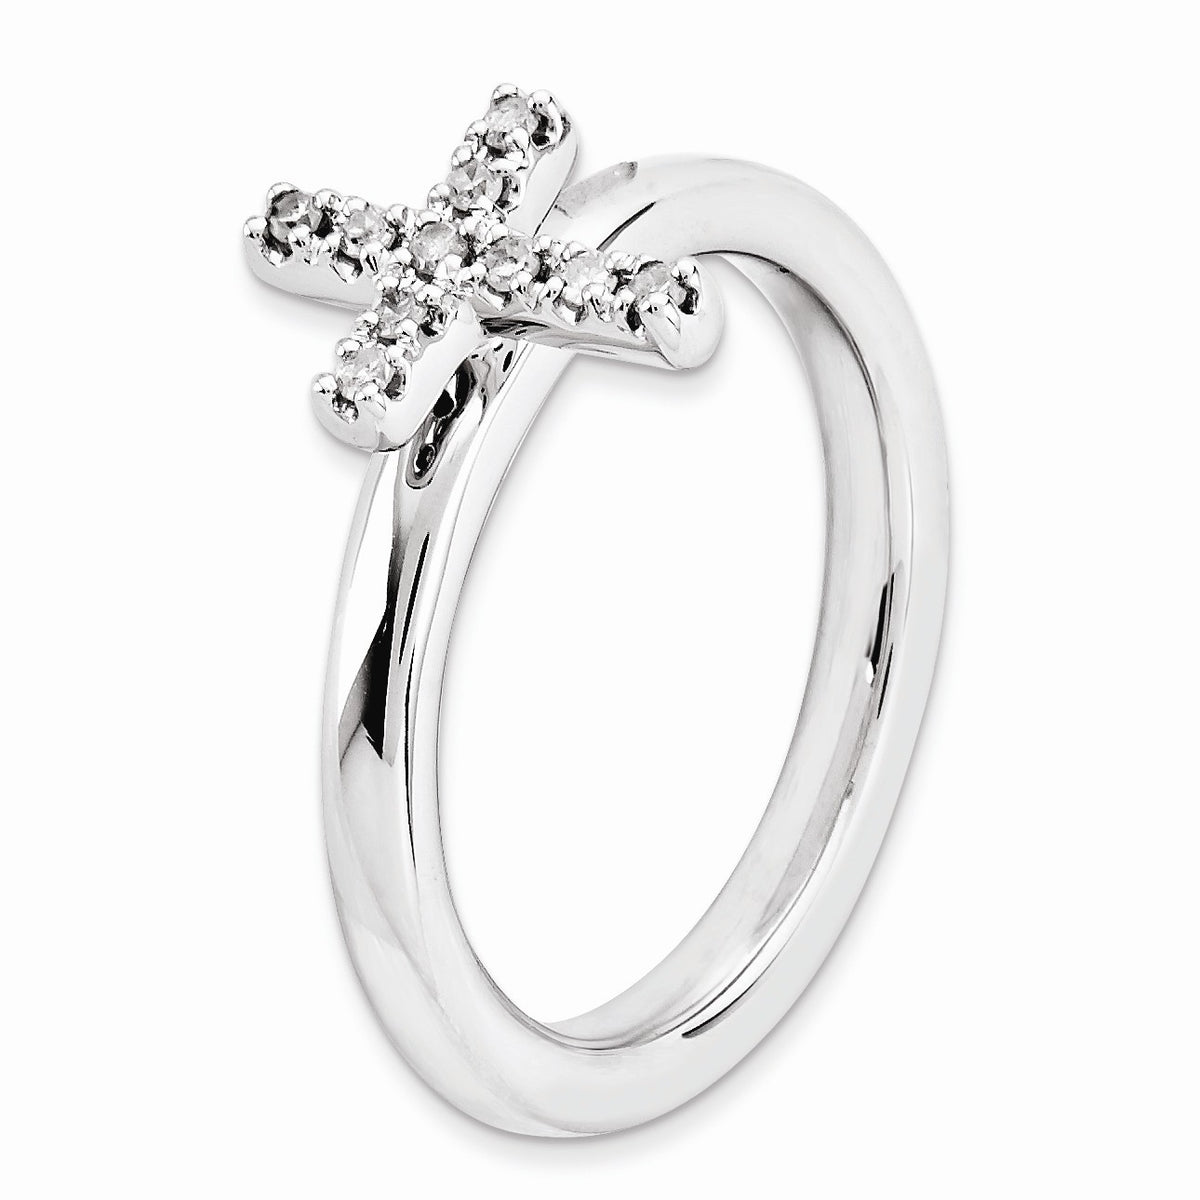 Alternate view of the Sterling Silver Stackable 1/10 Ctw HI/I3 Diamond 10mm Cross Ring by The Black Bow Jewelry Co.